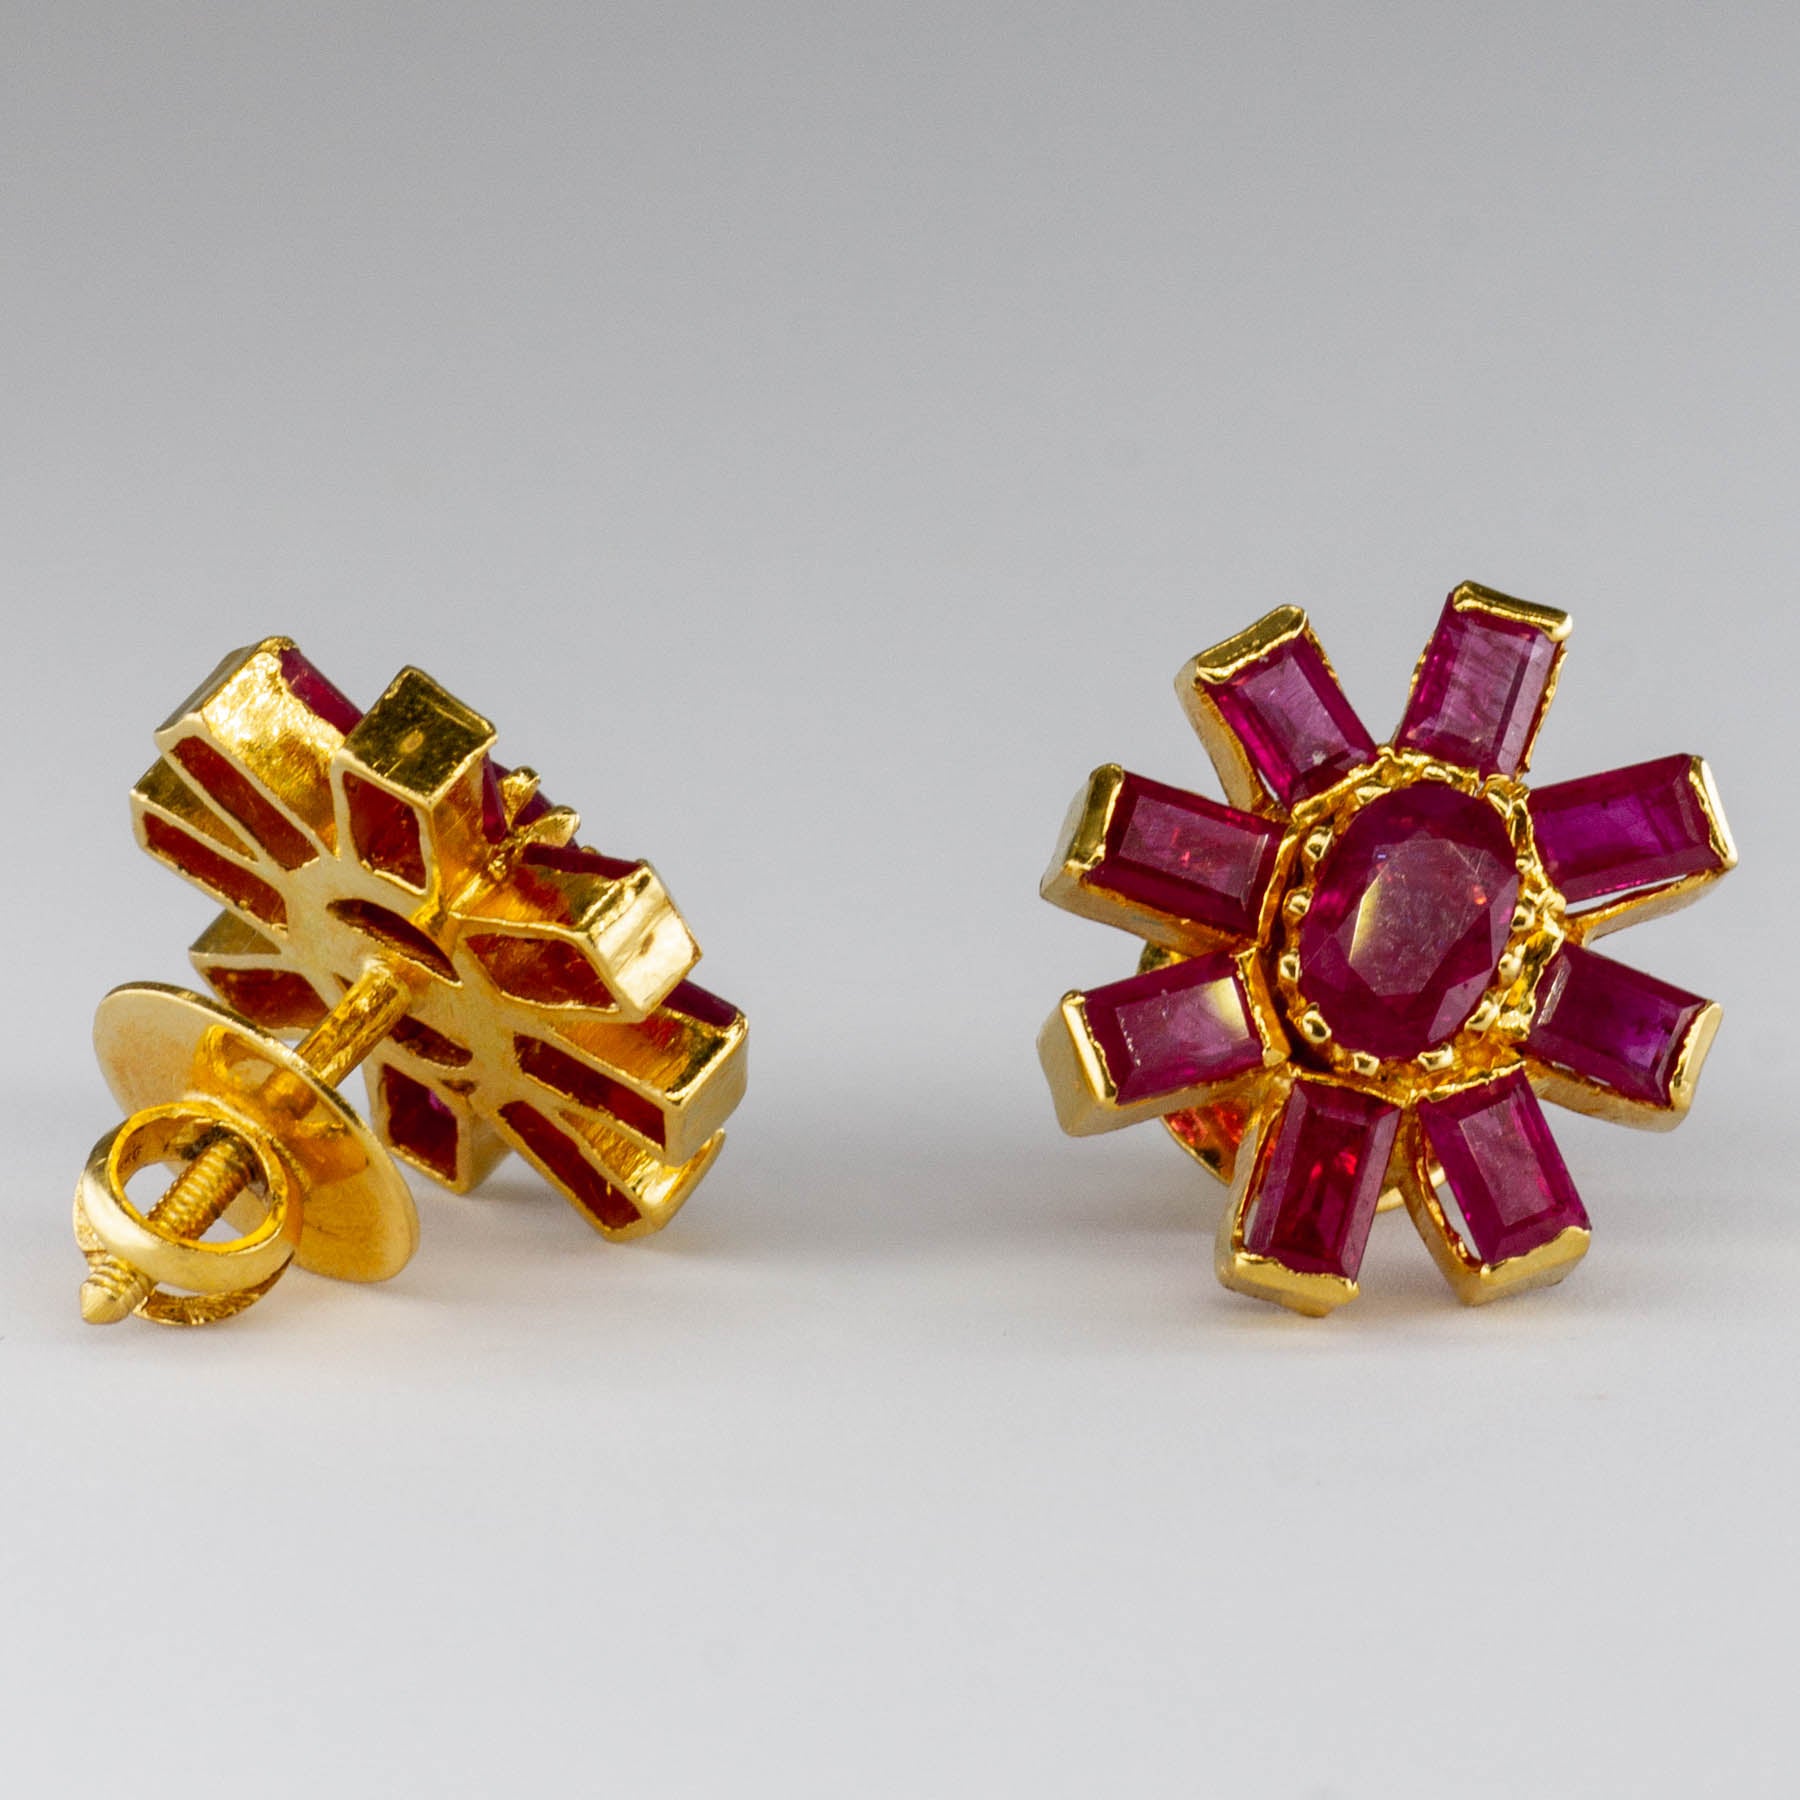 22k Yellow Gold and Ruby Earrings | 6.60 ctw |